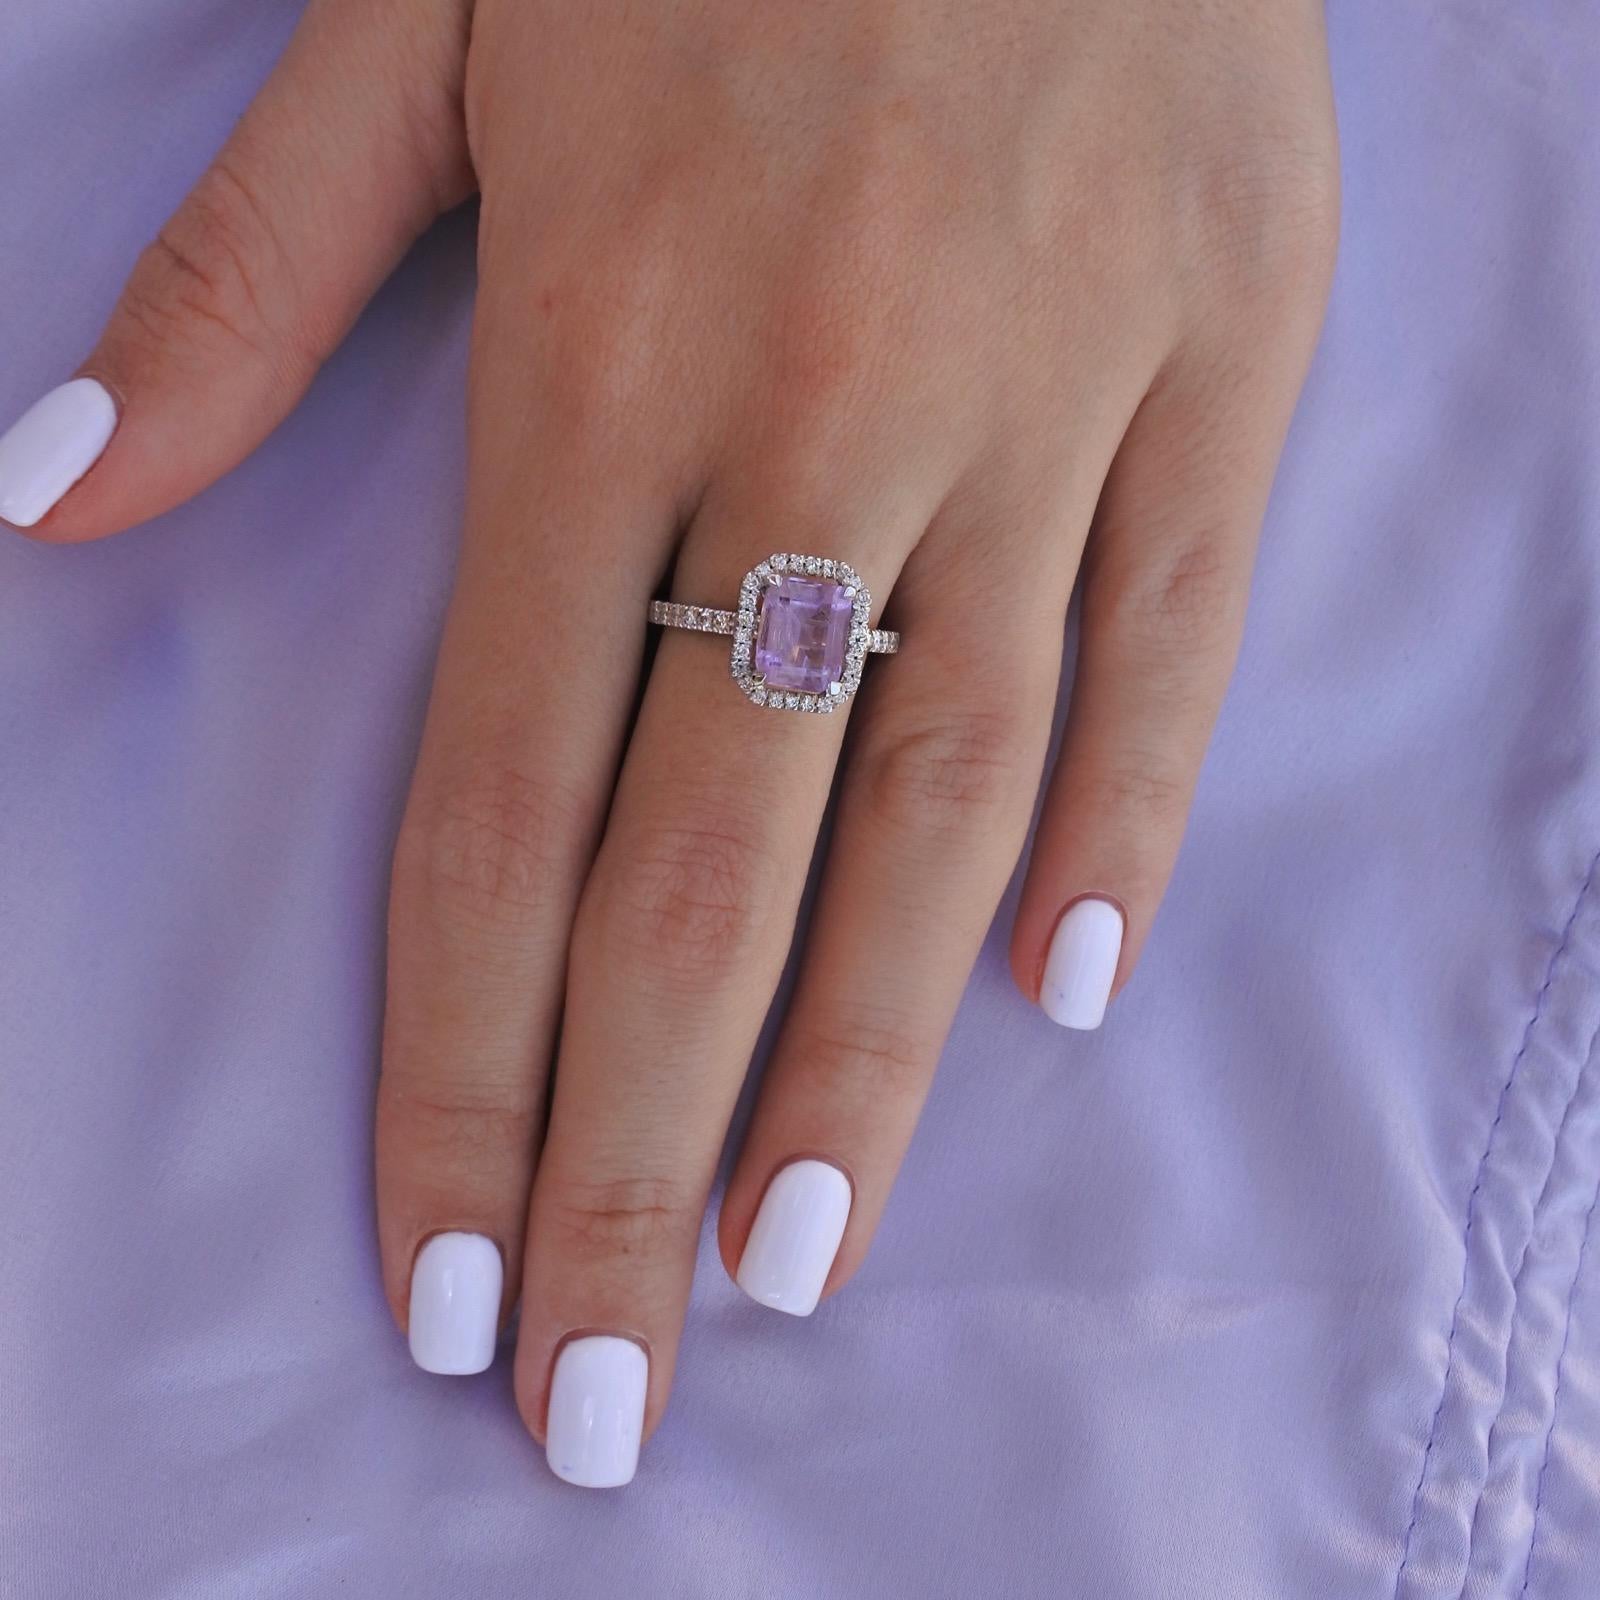 Women's 1.65 Carat Emerald Cut Amethyst and Diamonds Ring in White Gold - Shlomit Rogel For Sale